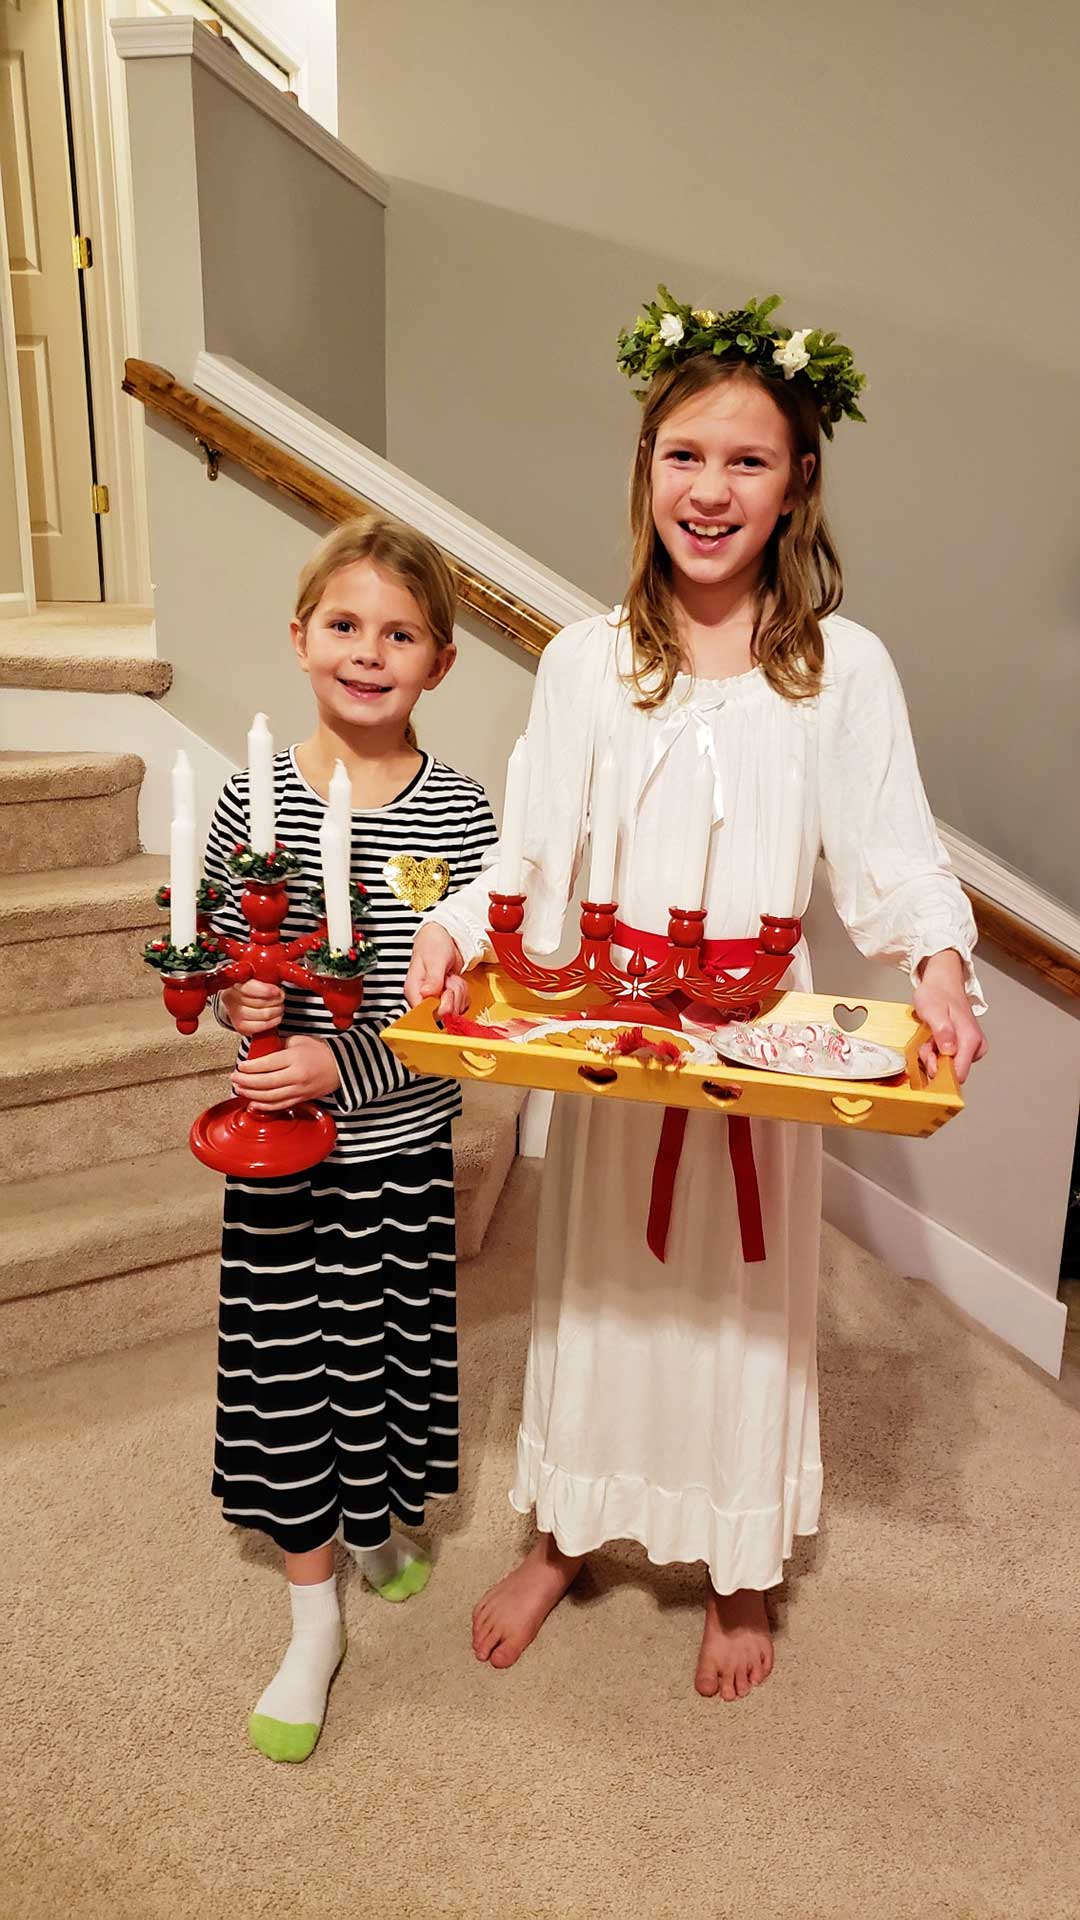 Two young girls with blonde hair, one dressed as St. Lucia, hold tray of candelabra and cookies while smiling at the camera.